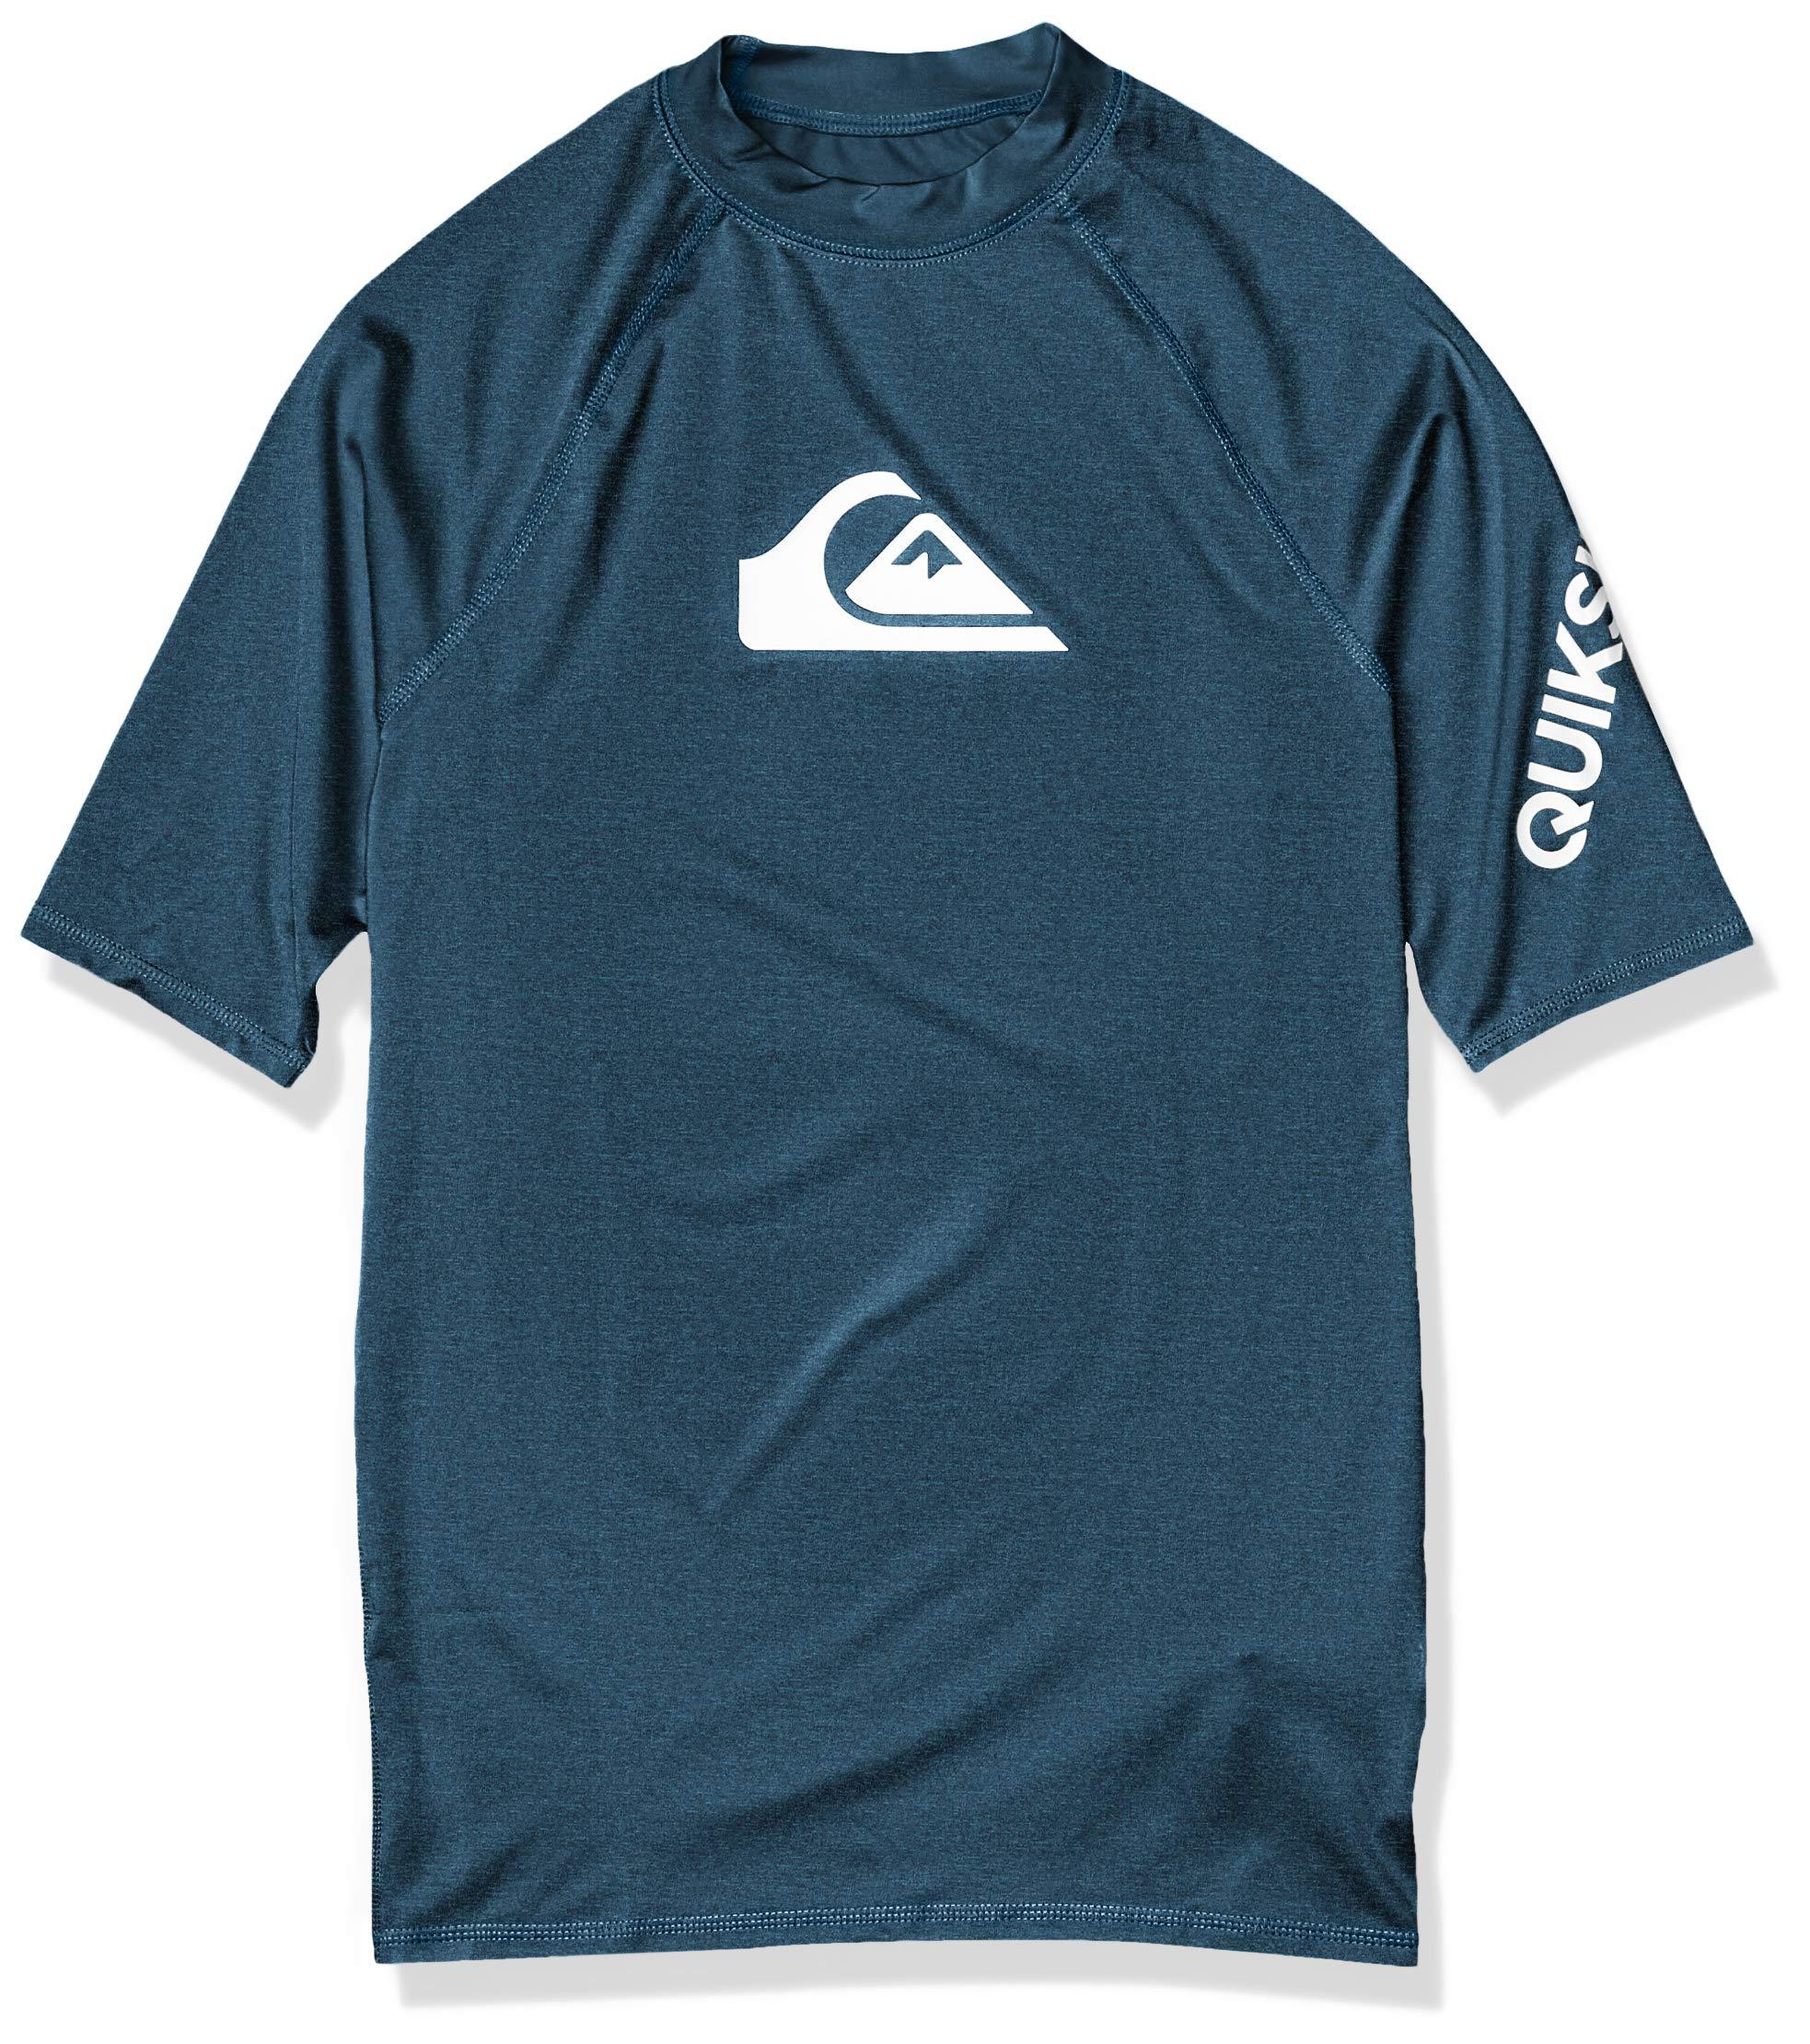 Quiksilver Synthetic All Time Ss Short Sleeve Rashguard Surf Shirt in ...